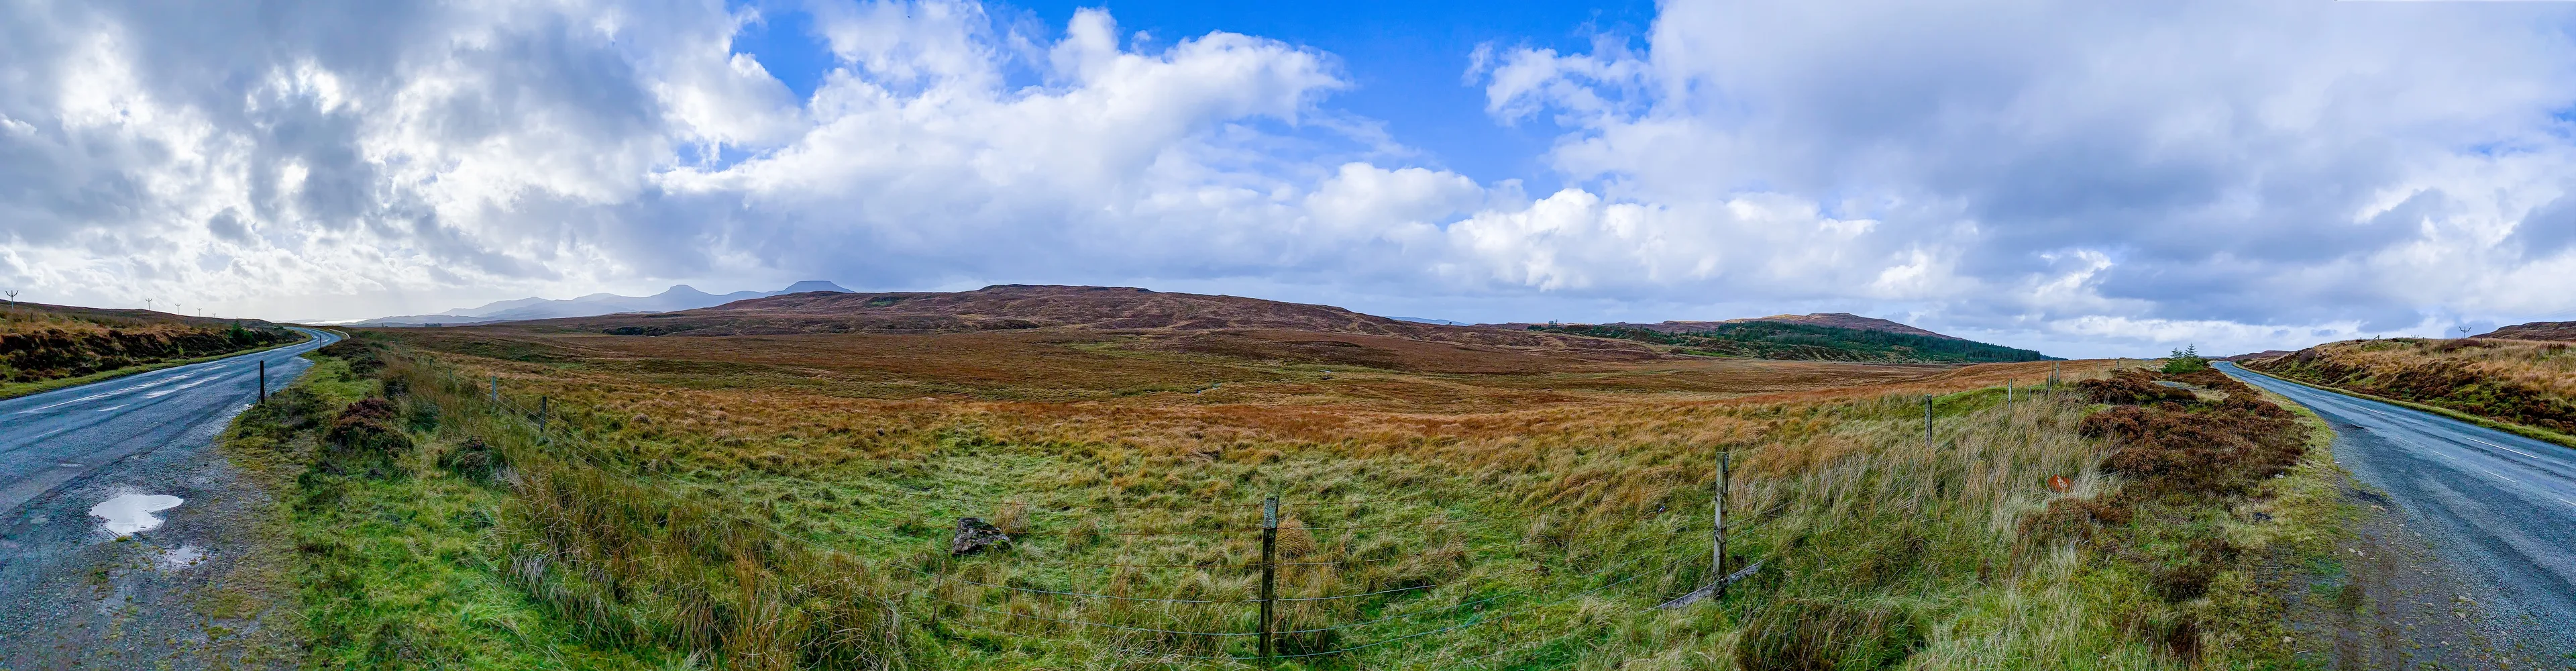 Panorama photo from middle of the Isle of Skye, Scotland, UK